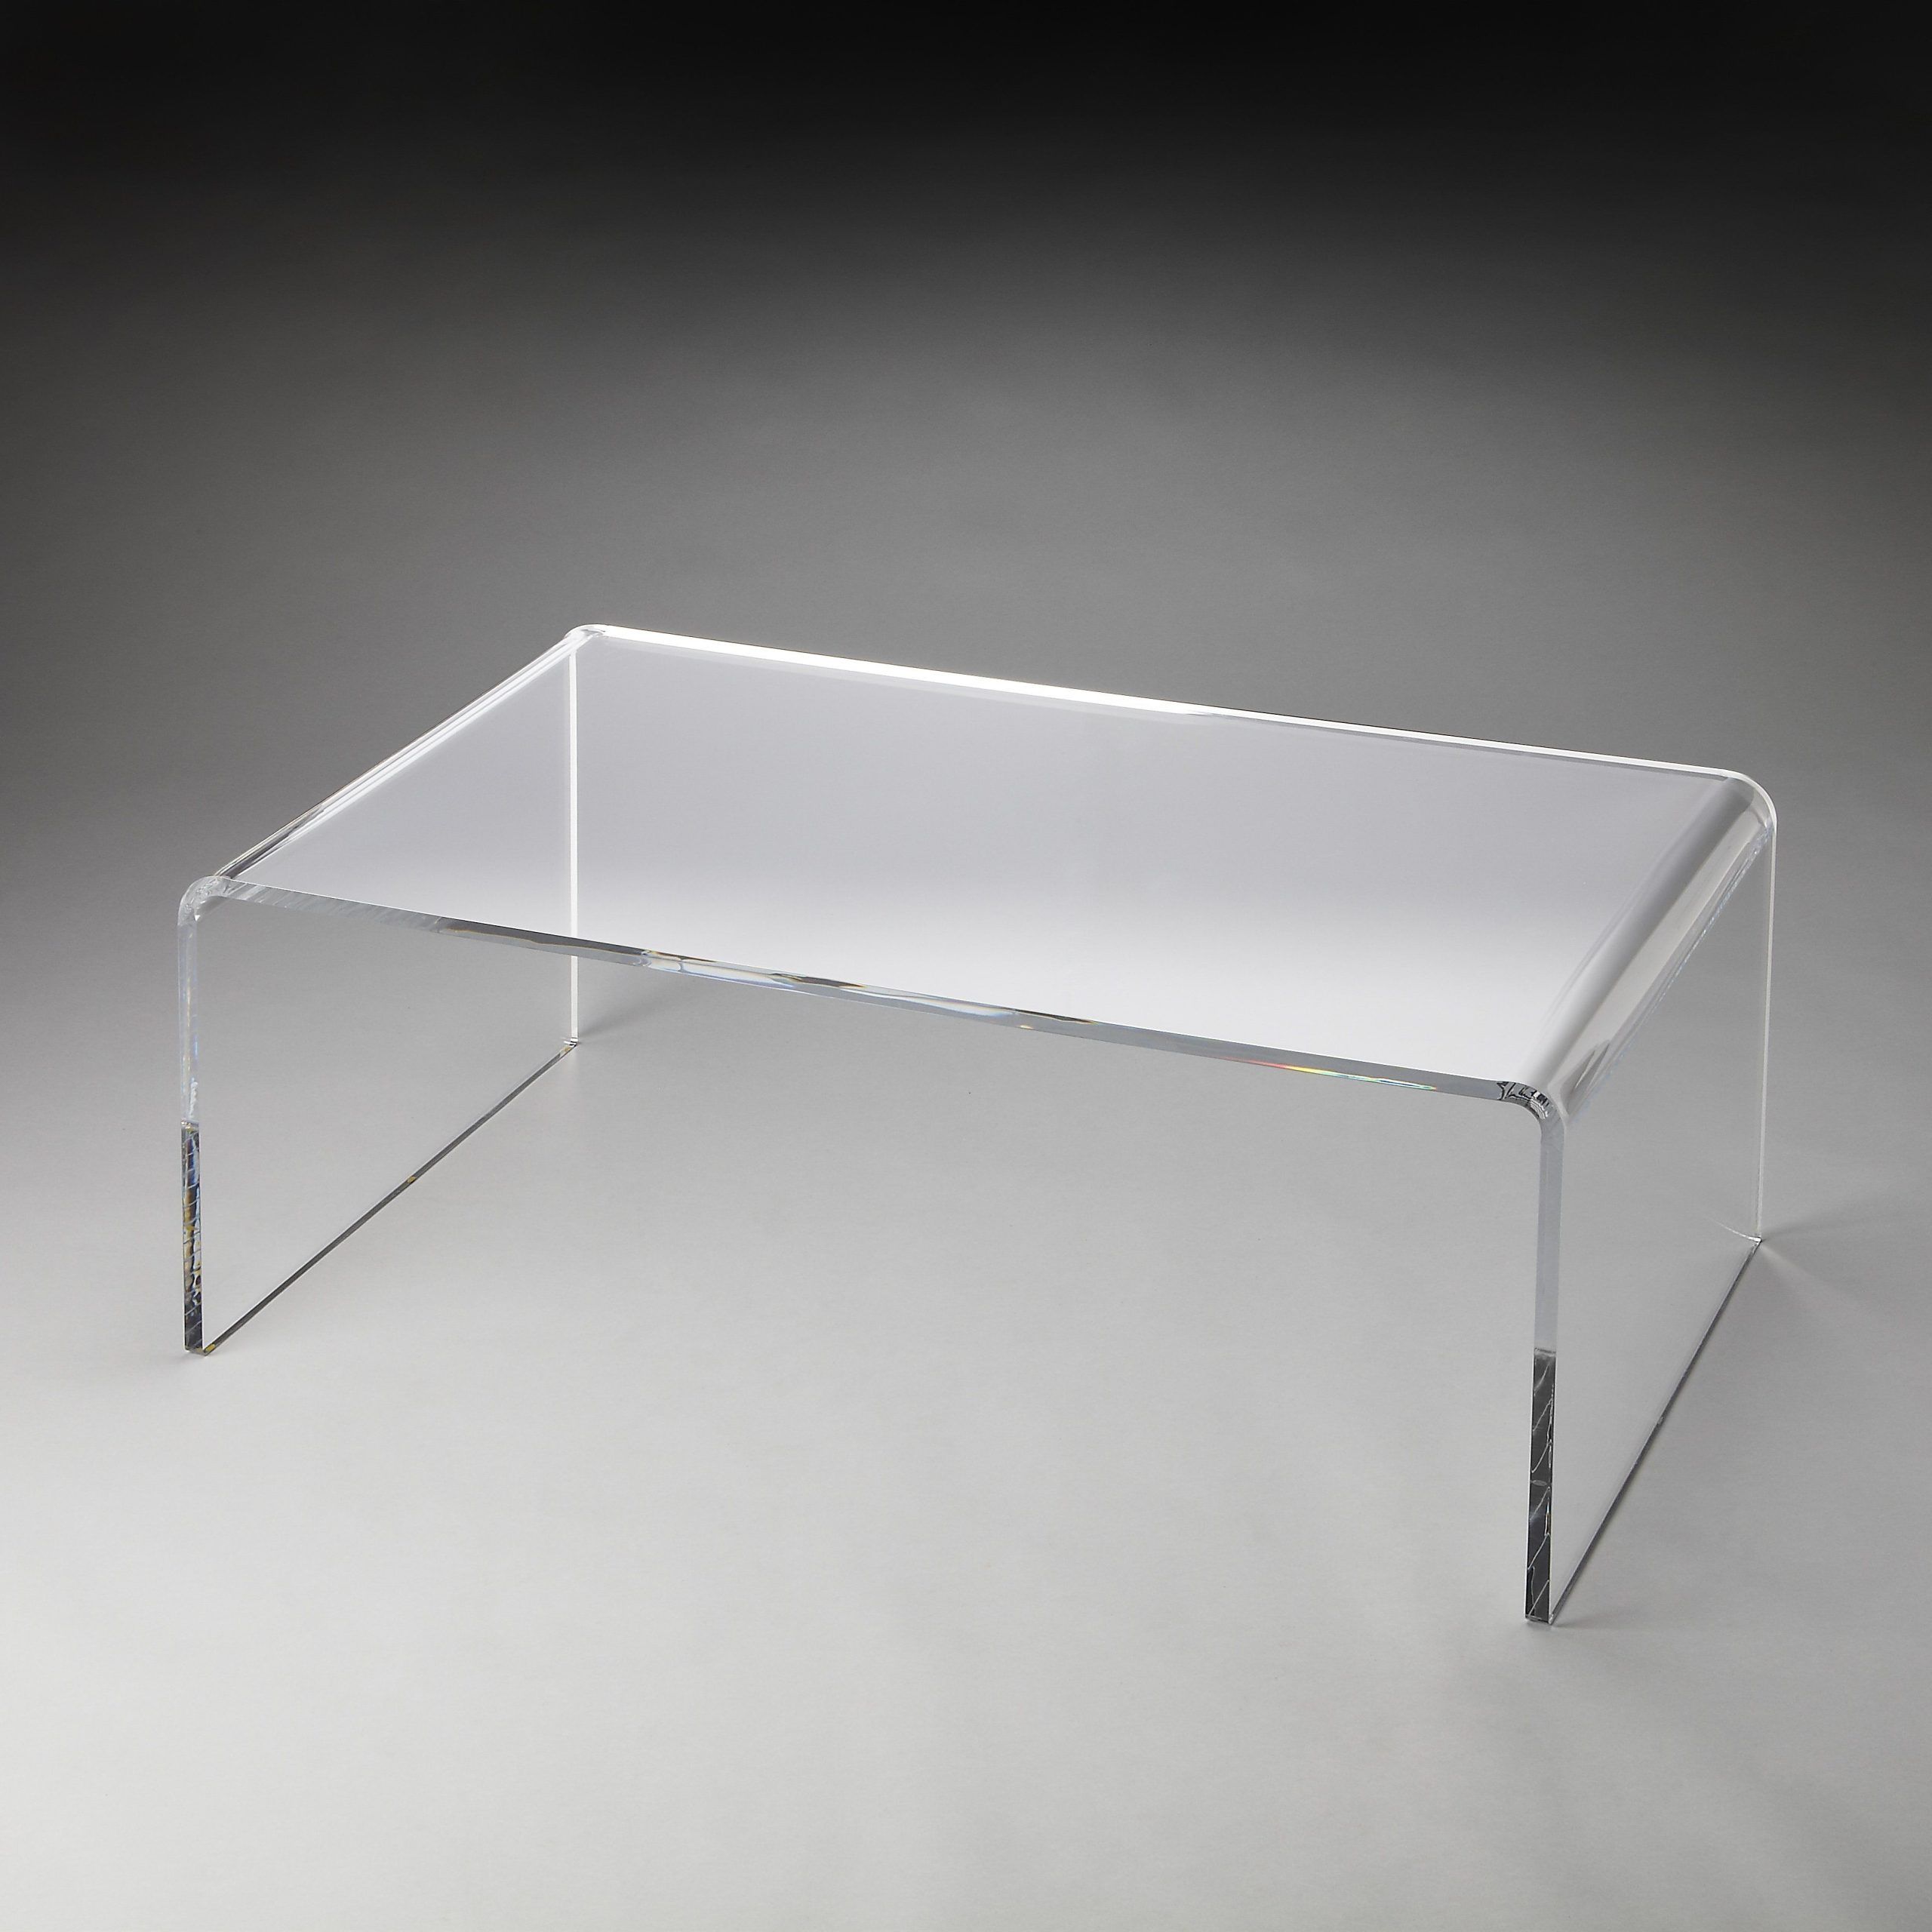 Crystal Clear Acrylic Coffee Table | Acrylic Coffee Table, Sleek Coffee Throughout Clear Rectangle Center Coffee Tables (Gallery 13 of 20)